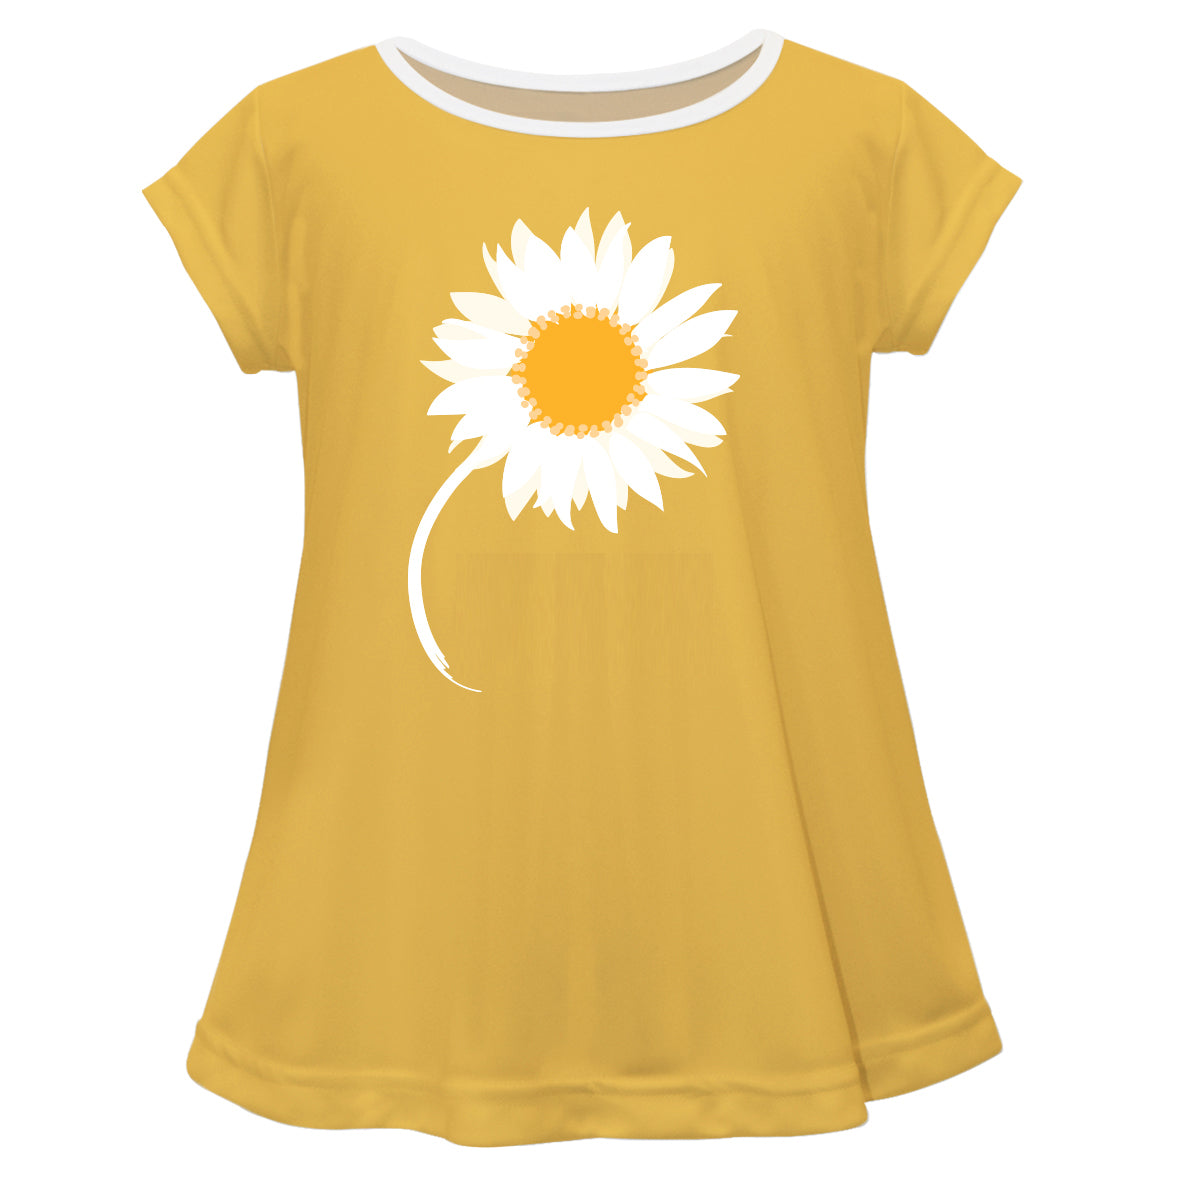 Girls yellow sunflowers blouse with name - Wimziy&Co.